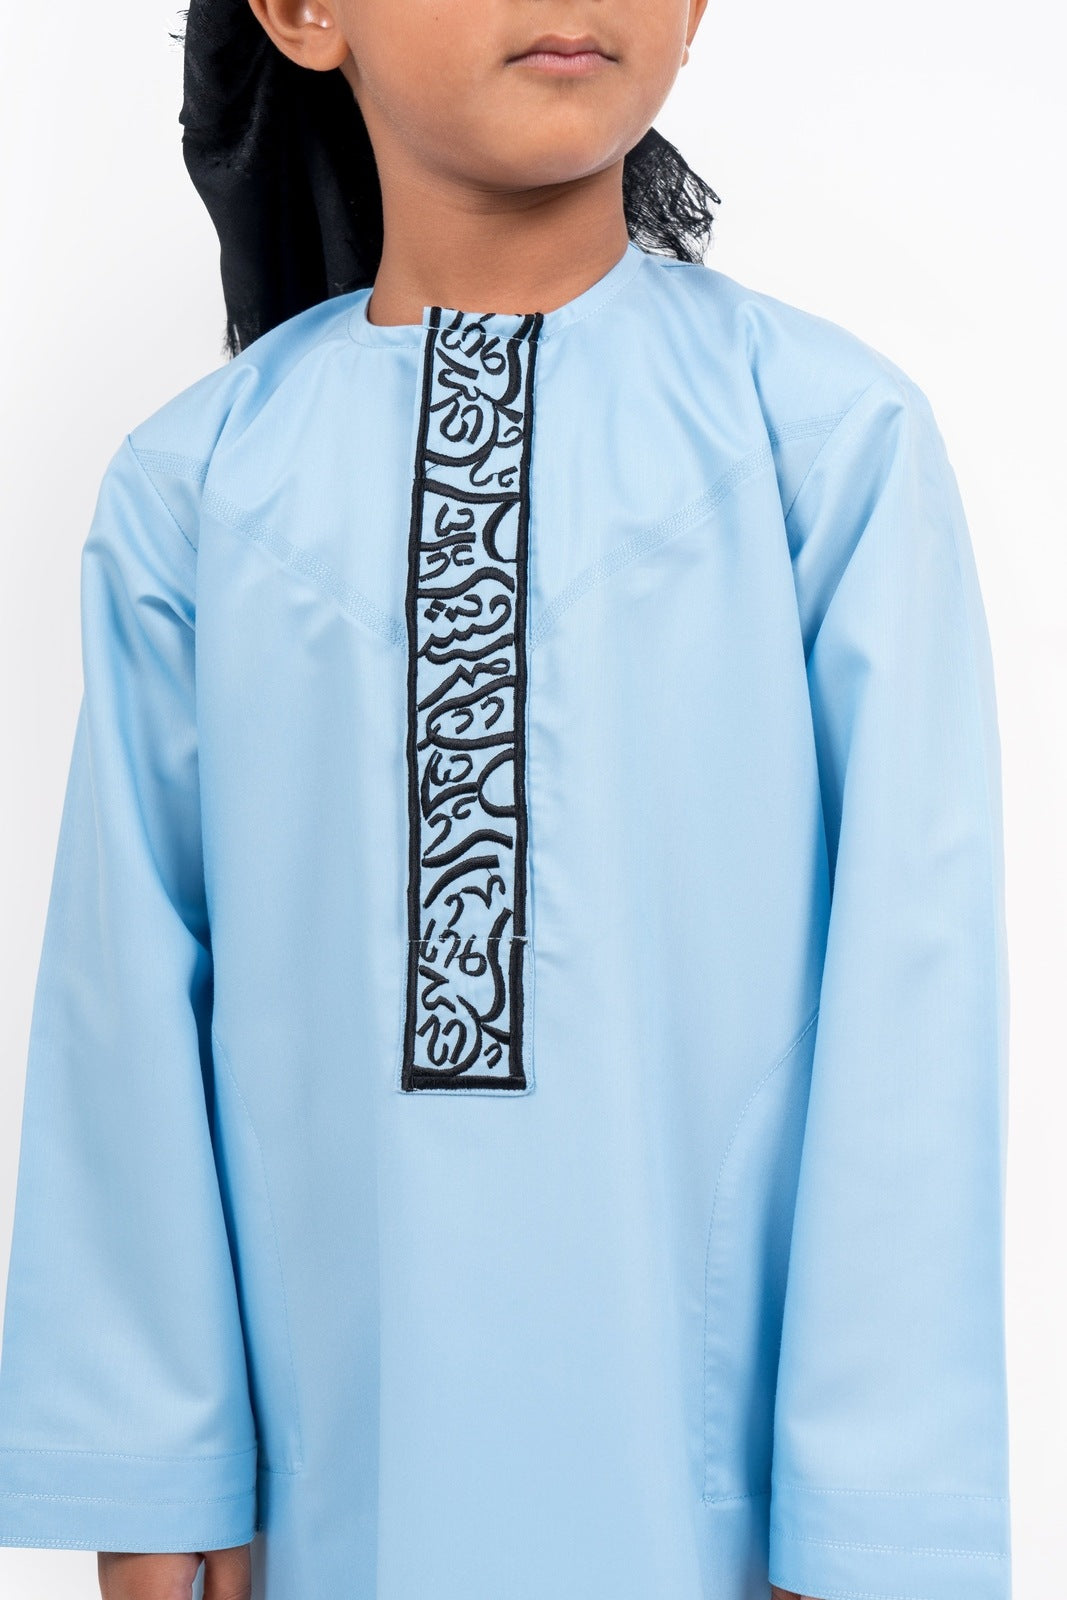 Kids Icy Blue Emirati Thobe with Gold Calligraphy Jubba Thobes